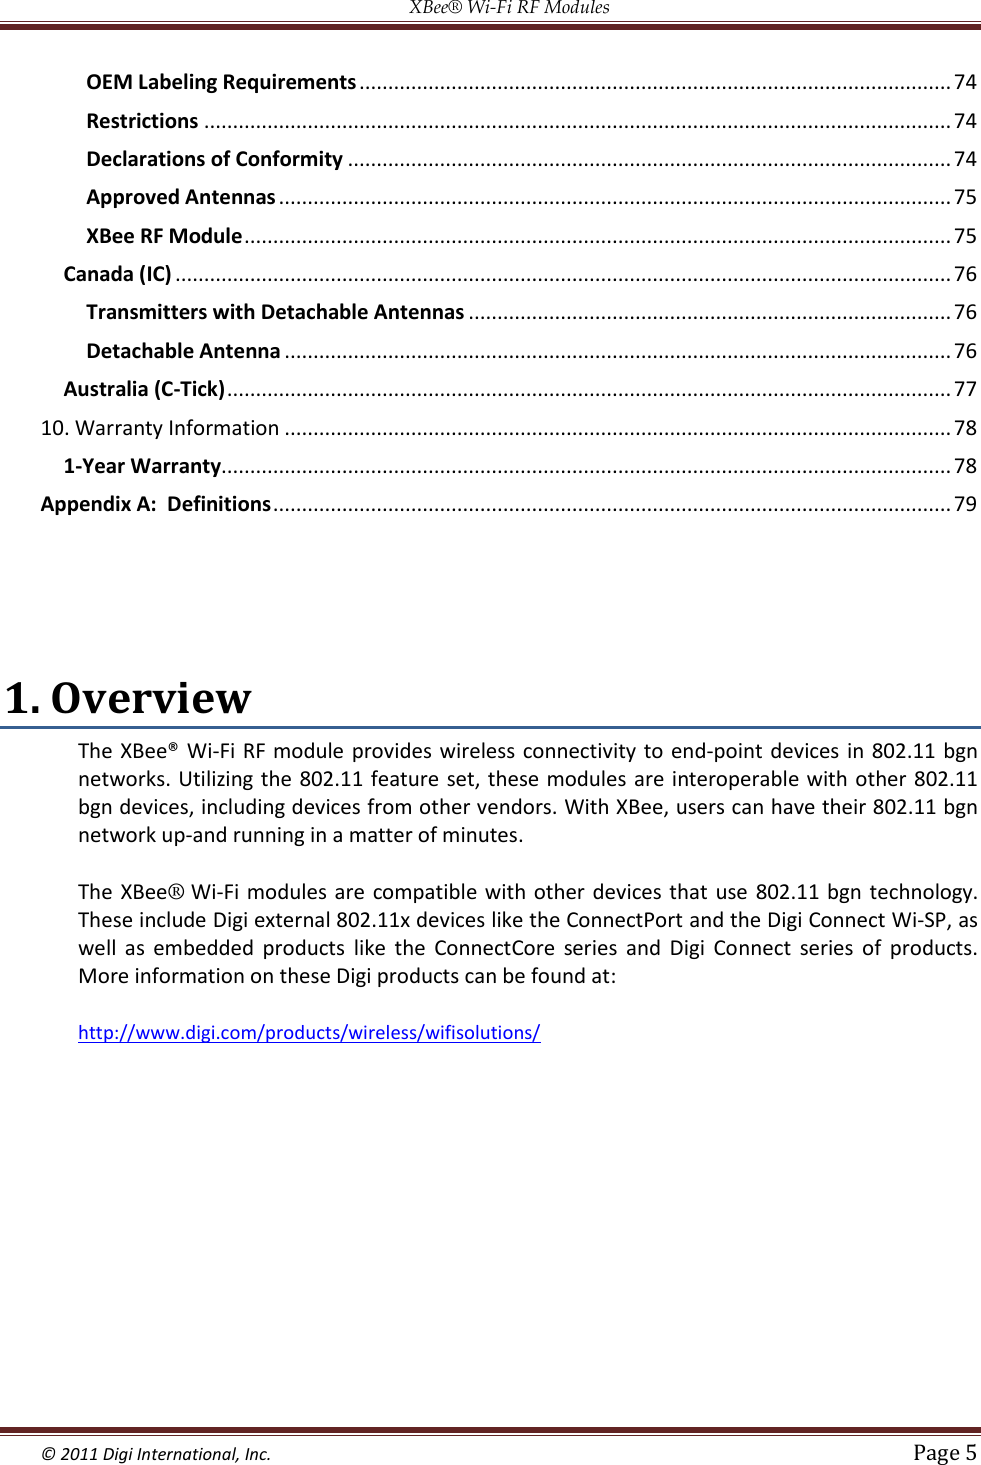 XBee® Wi-Fi RF Modules  © 2011 Digi International, Inc.   Page 5  OEM Labeling Requirements ....................................................................................................... 74 Restrictions .................................................................................................................................. 74 Declarations of Conformity ......................................................................................................... 74 Approved Antennas ..................................................................................................................... 75 XBee RF Module ........................................................................................................................... 75 Canada (IC) ....................................................................................................................................... 76 Transmitters with Detachable Antennas .................................................................................... 76 Detachable Antenna .................................................................................................................... 76 Australia (C-Tick) .............................................................................................................................. 77 10. Warranty Information .................................................................................................................... 78 1-Year Warranty............................................................................................................................... 78 Appendix A:  Definitions ...................................................................................................................... 79   1. Overview The XBee® Wi-Fi RF module provides wireless  connectivity to end-point devices  in 802.11 bgn networks. Utilizing the 802.11 feature set, these modules  are  interoperable  with other 802.11 bgn devices, including devices from other vendors. With XBee, users can have their 802.11 bgn network up-and running in a matter of minutes.  The XBee® Wi-Fi modules  are  compatible with other devices that  use  802.11 bgn  technology. These include Digi external 802.11x devices like the ConnectPort and the Digi Connect Wi-SP, as well  as  embedded  products  like  the  ConnectCore  series  and  Digi  Connect  series  of  products.  More information on these Digi products can be found at:  http://www.digi.com/products/wireless/wifisolutions/    